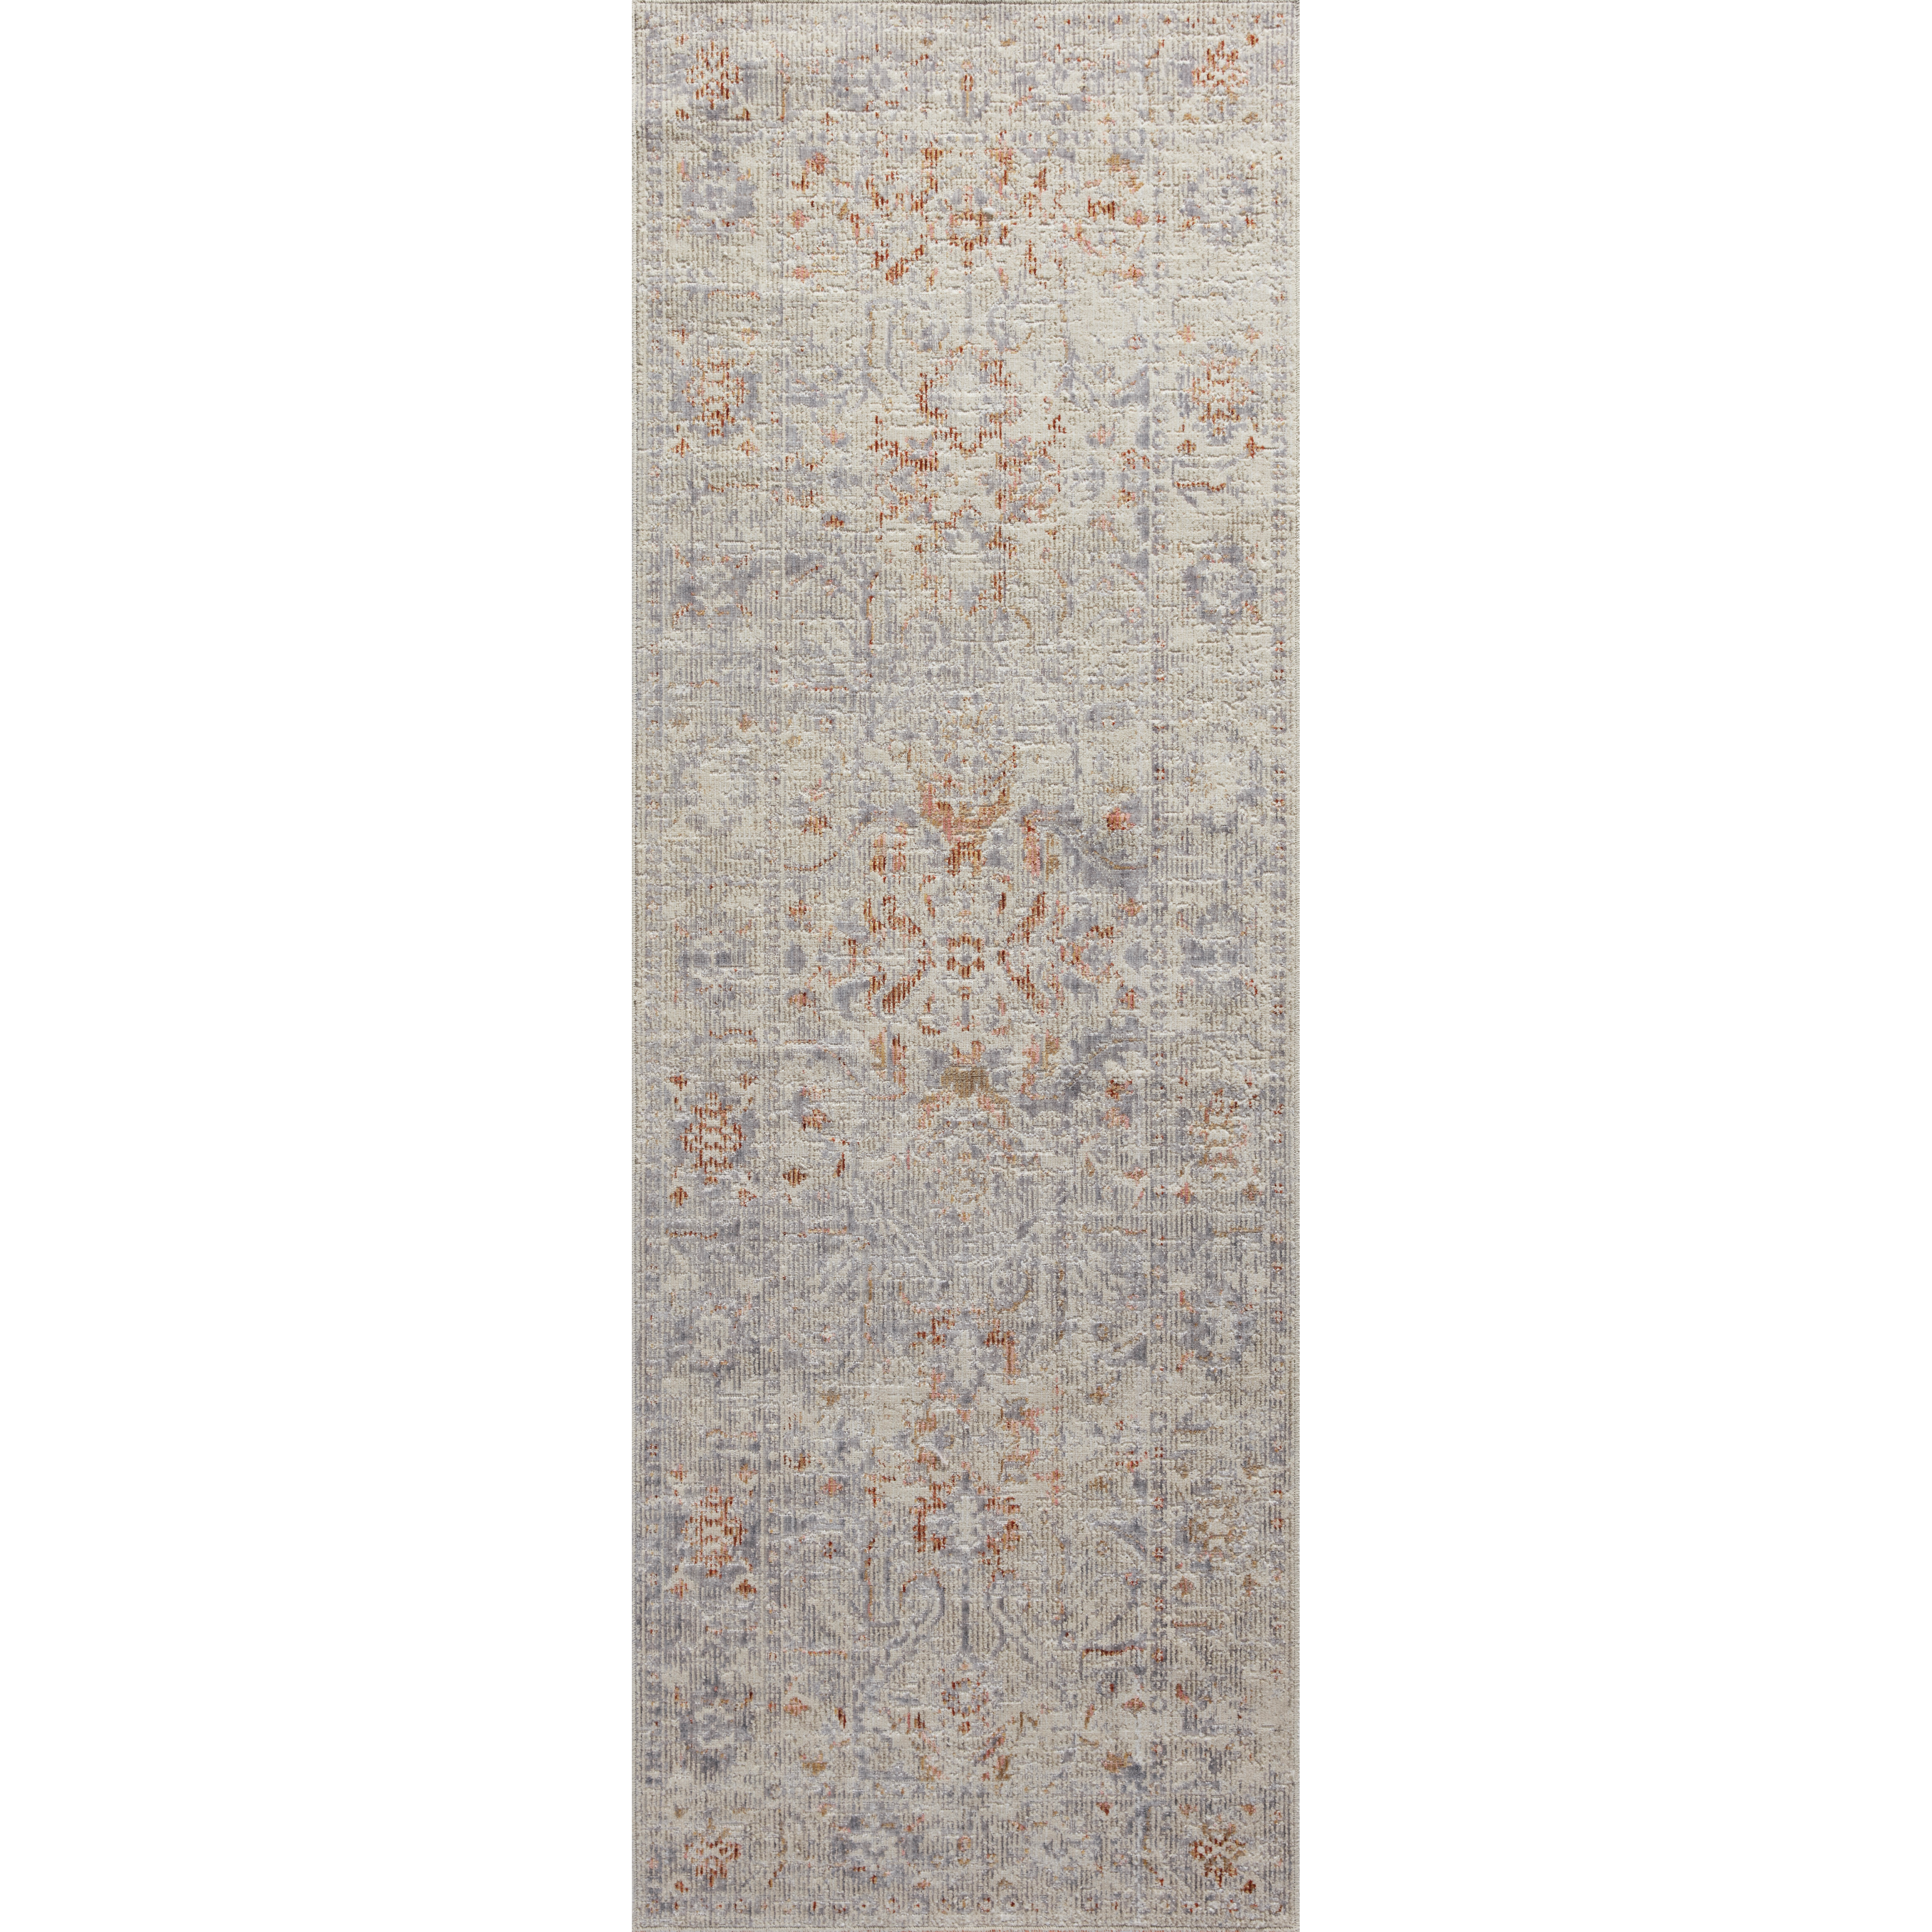 Durable, low pile, and soft, this rug is inspired by classic vintage and antique rugs. The Rosemarie Chris Loves Julia Oatmeal / Lavender ROE-05 rug from Loloi features a beautiful vintage pattern and patina. The rug is easy to clean, never sheds, and perfect for living rooms, dining rooms, hallways, and kitchens!